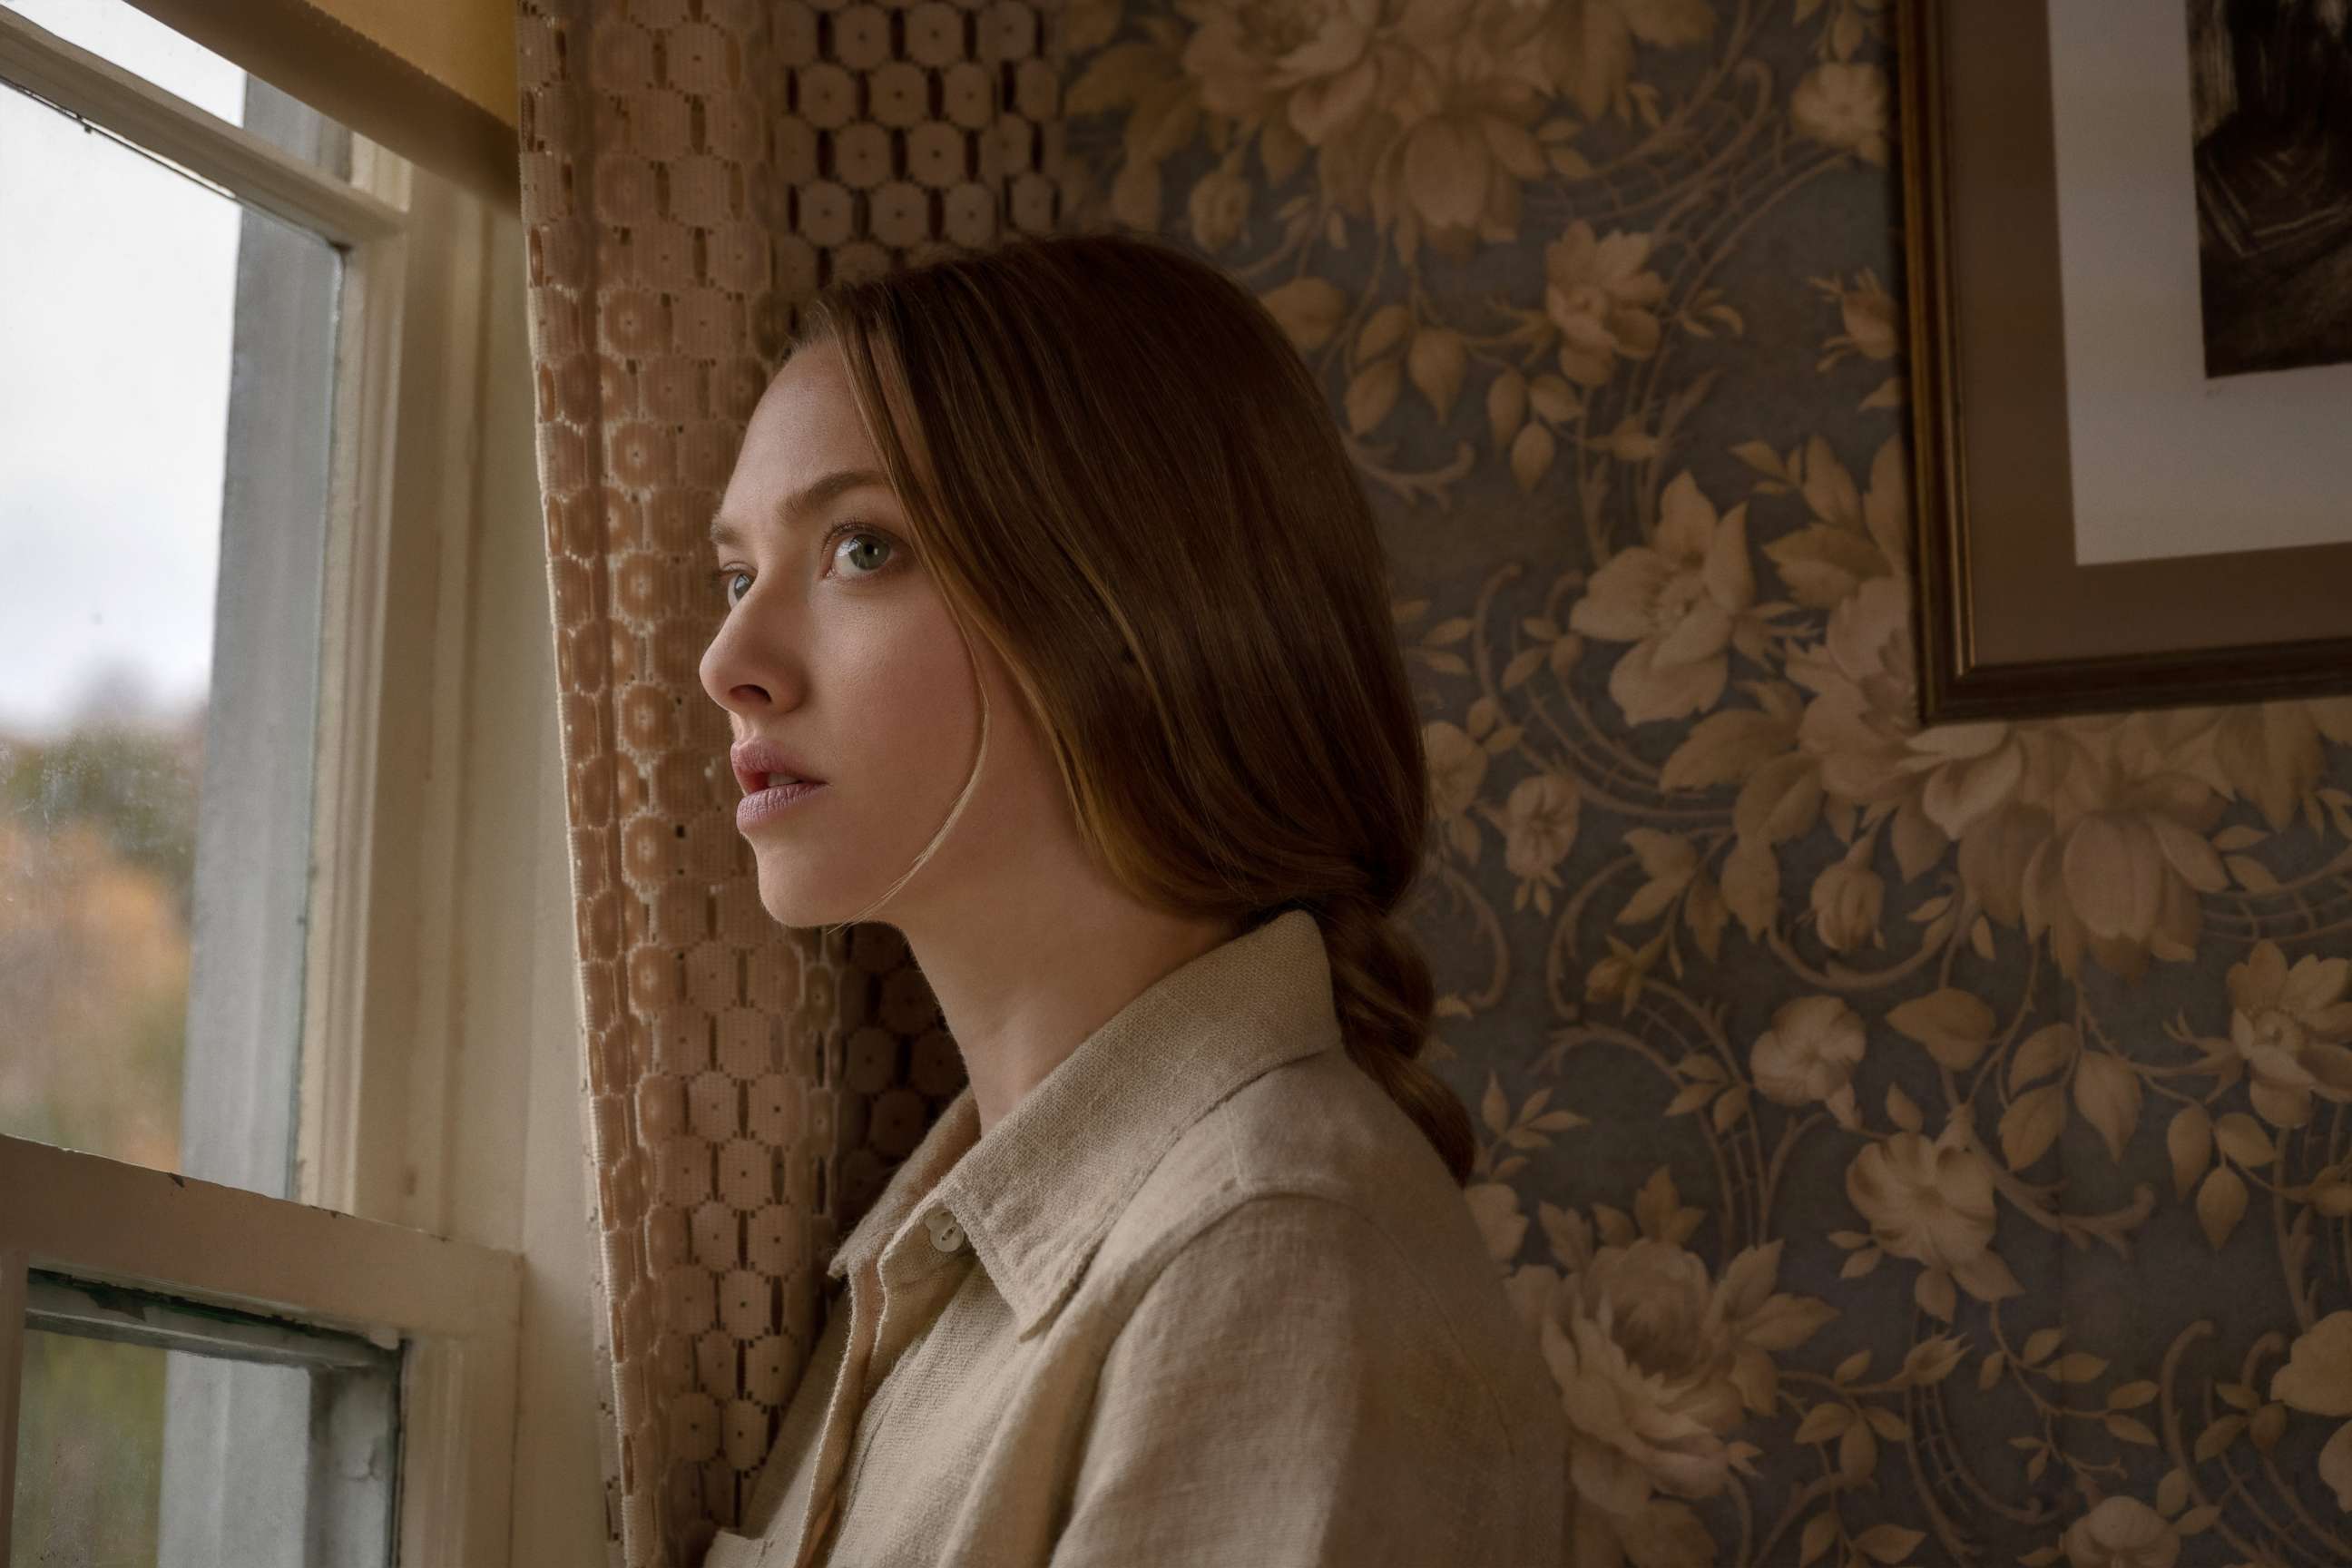 PHOTO: Amanda Seyfried, as Catherine Clare, in a scene from "Things Heard and Seen."